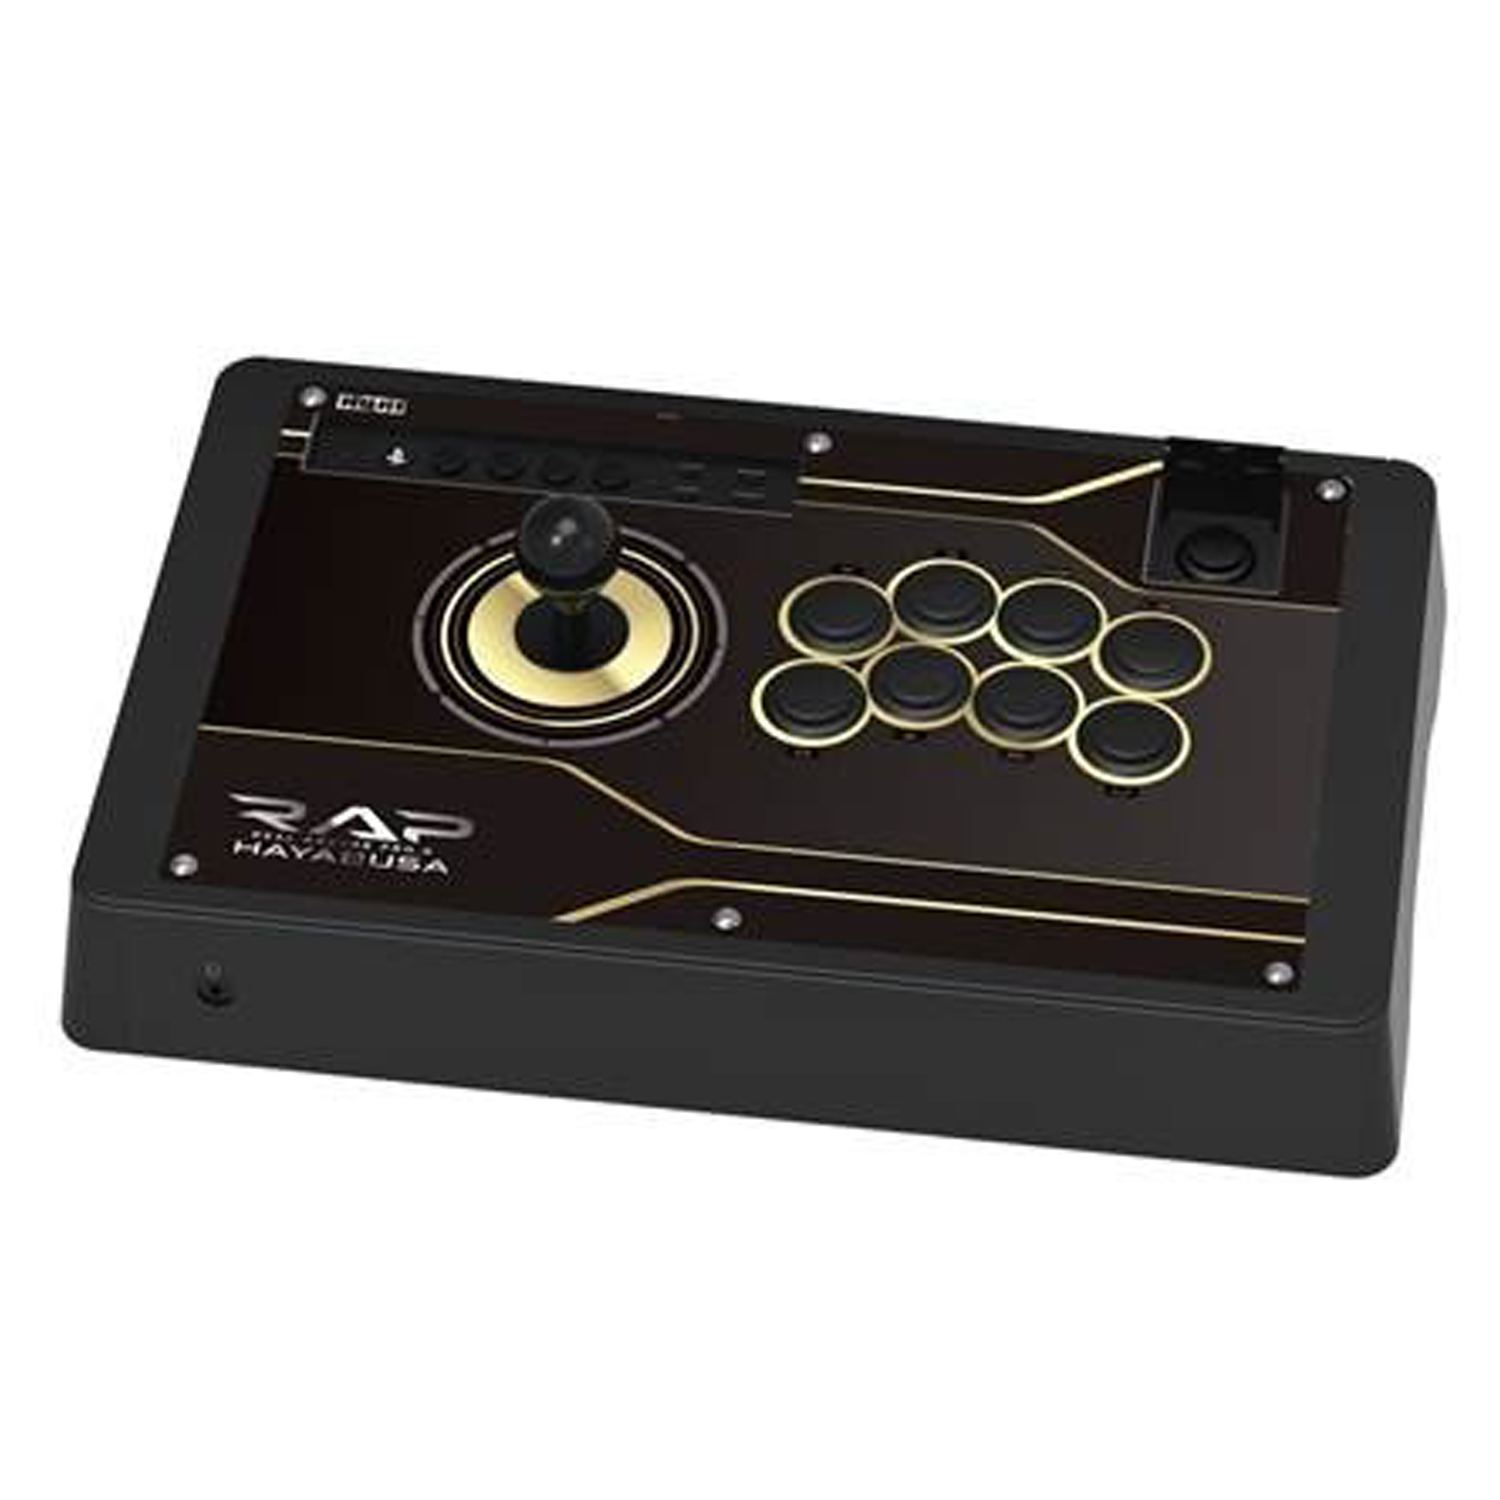 Real Arcade Pro.N Hayabusa for PlayStation 4 for PC, PS3, PS3 Slim 